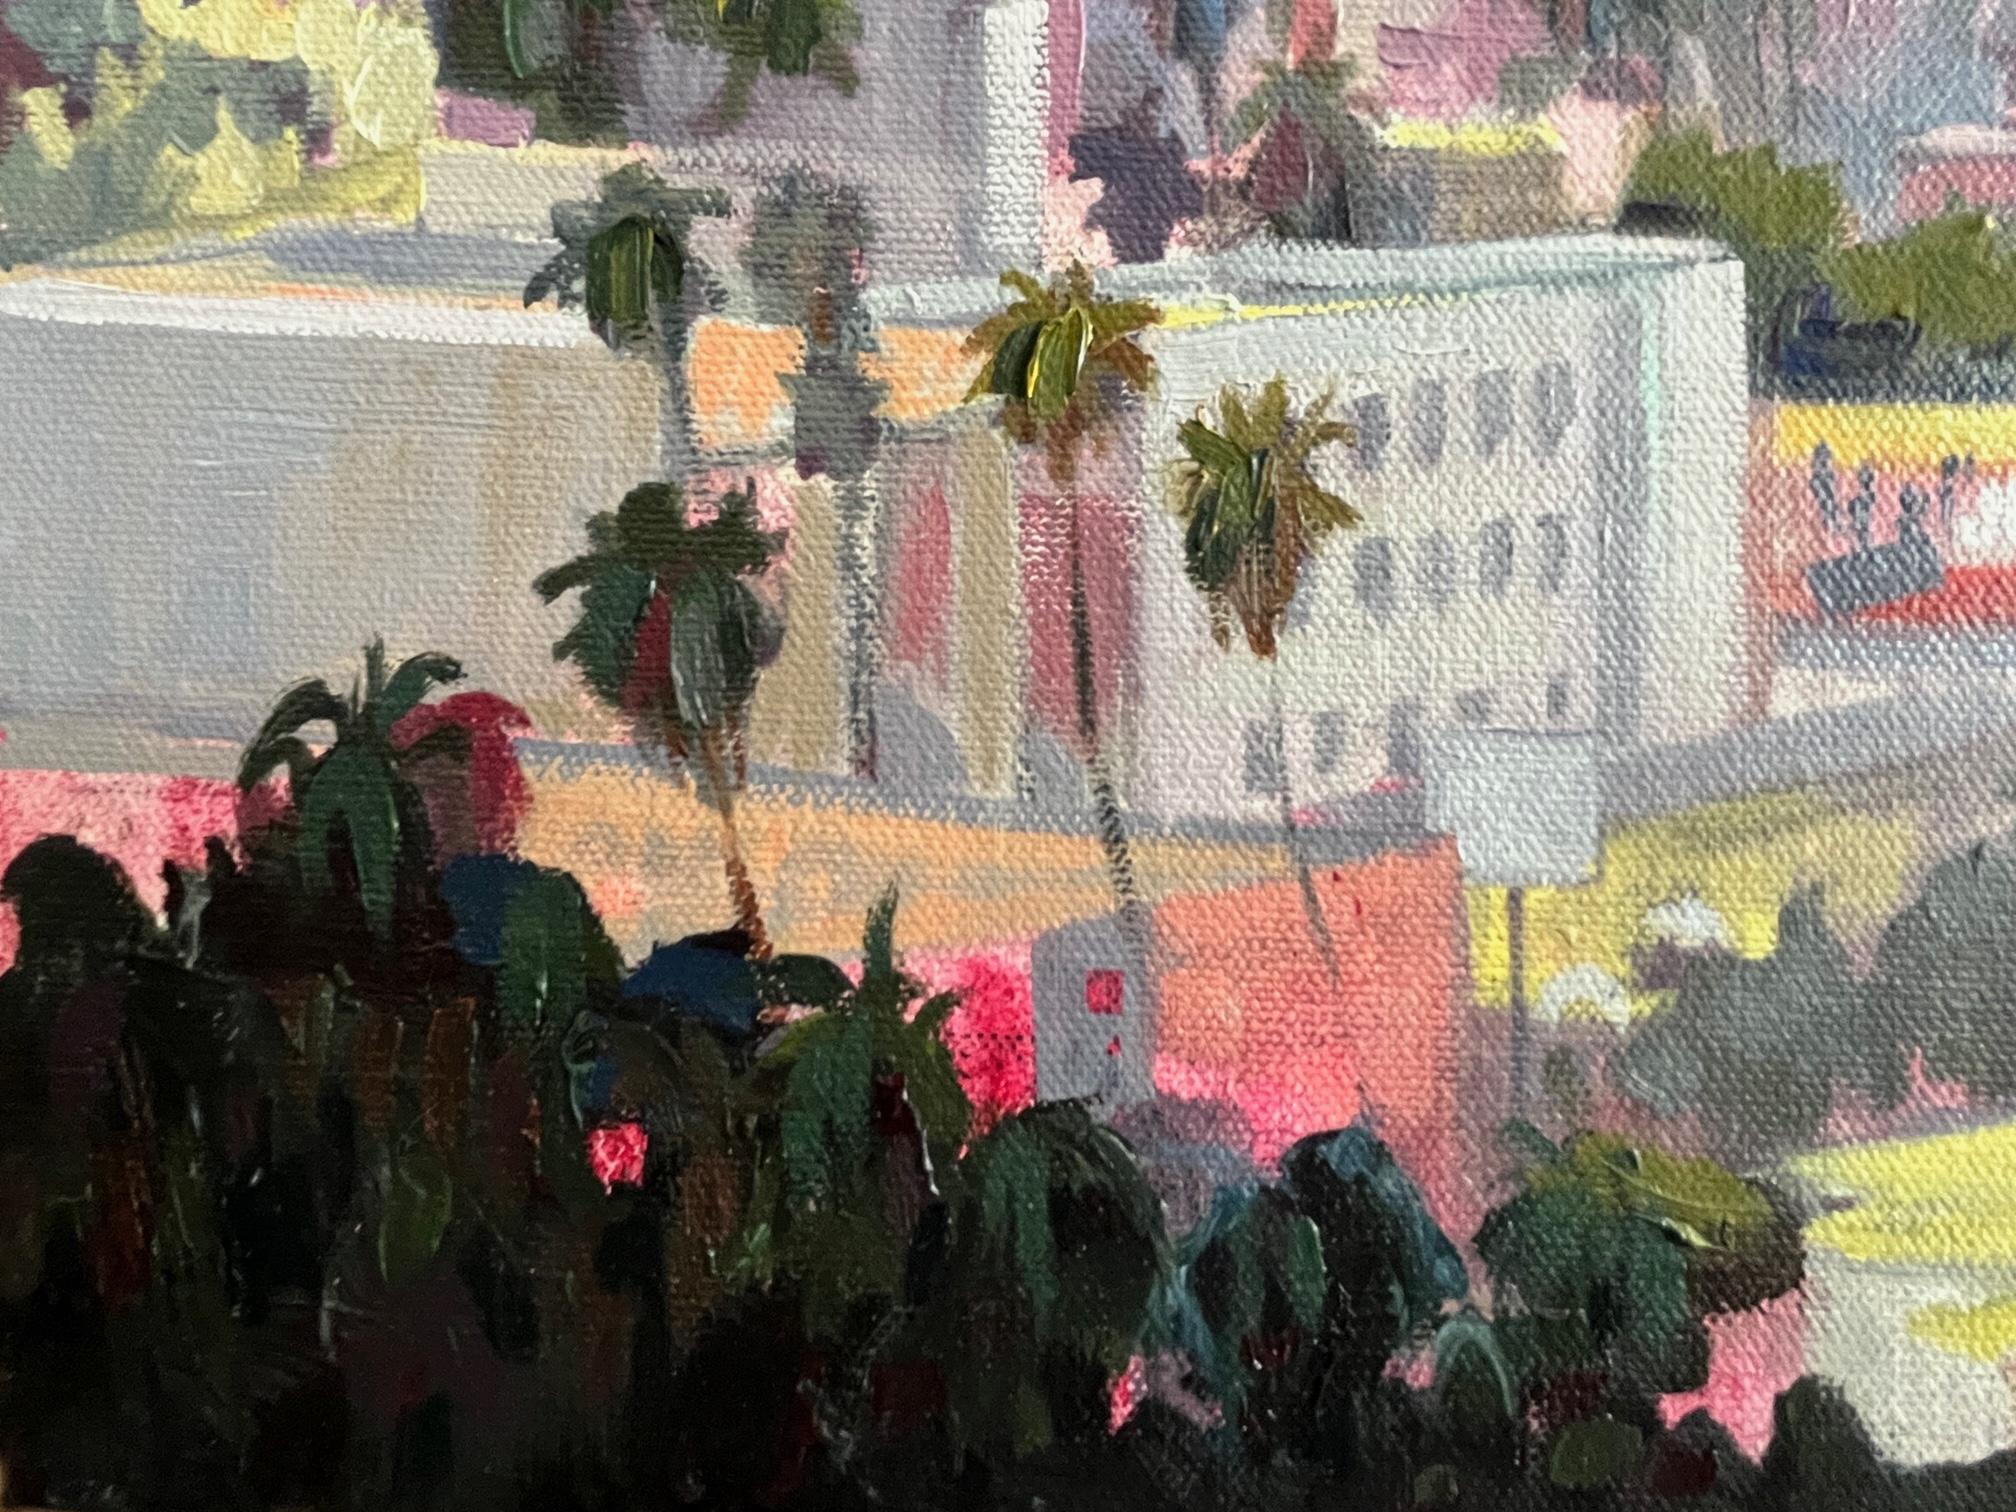 Artist Carole Garland chose to paint the city of Los Angeles, no small task, because so few artists were tackling the sprawling maze of ethnic neighborhoods, spread out suburbia and the out of control network of freeways.
The city presents hundreds